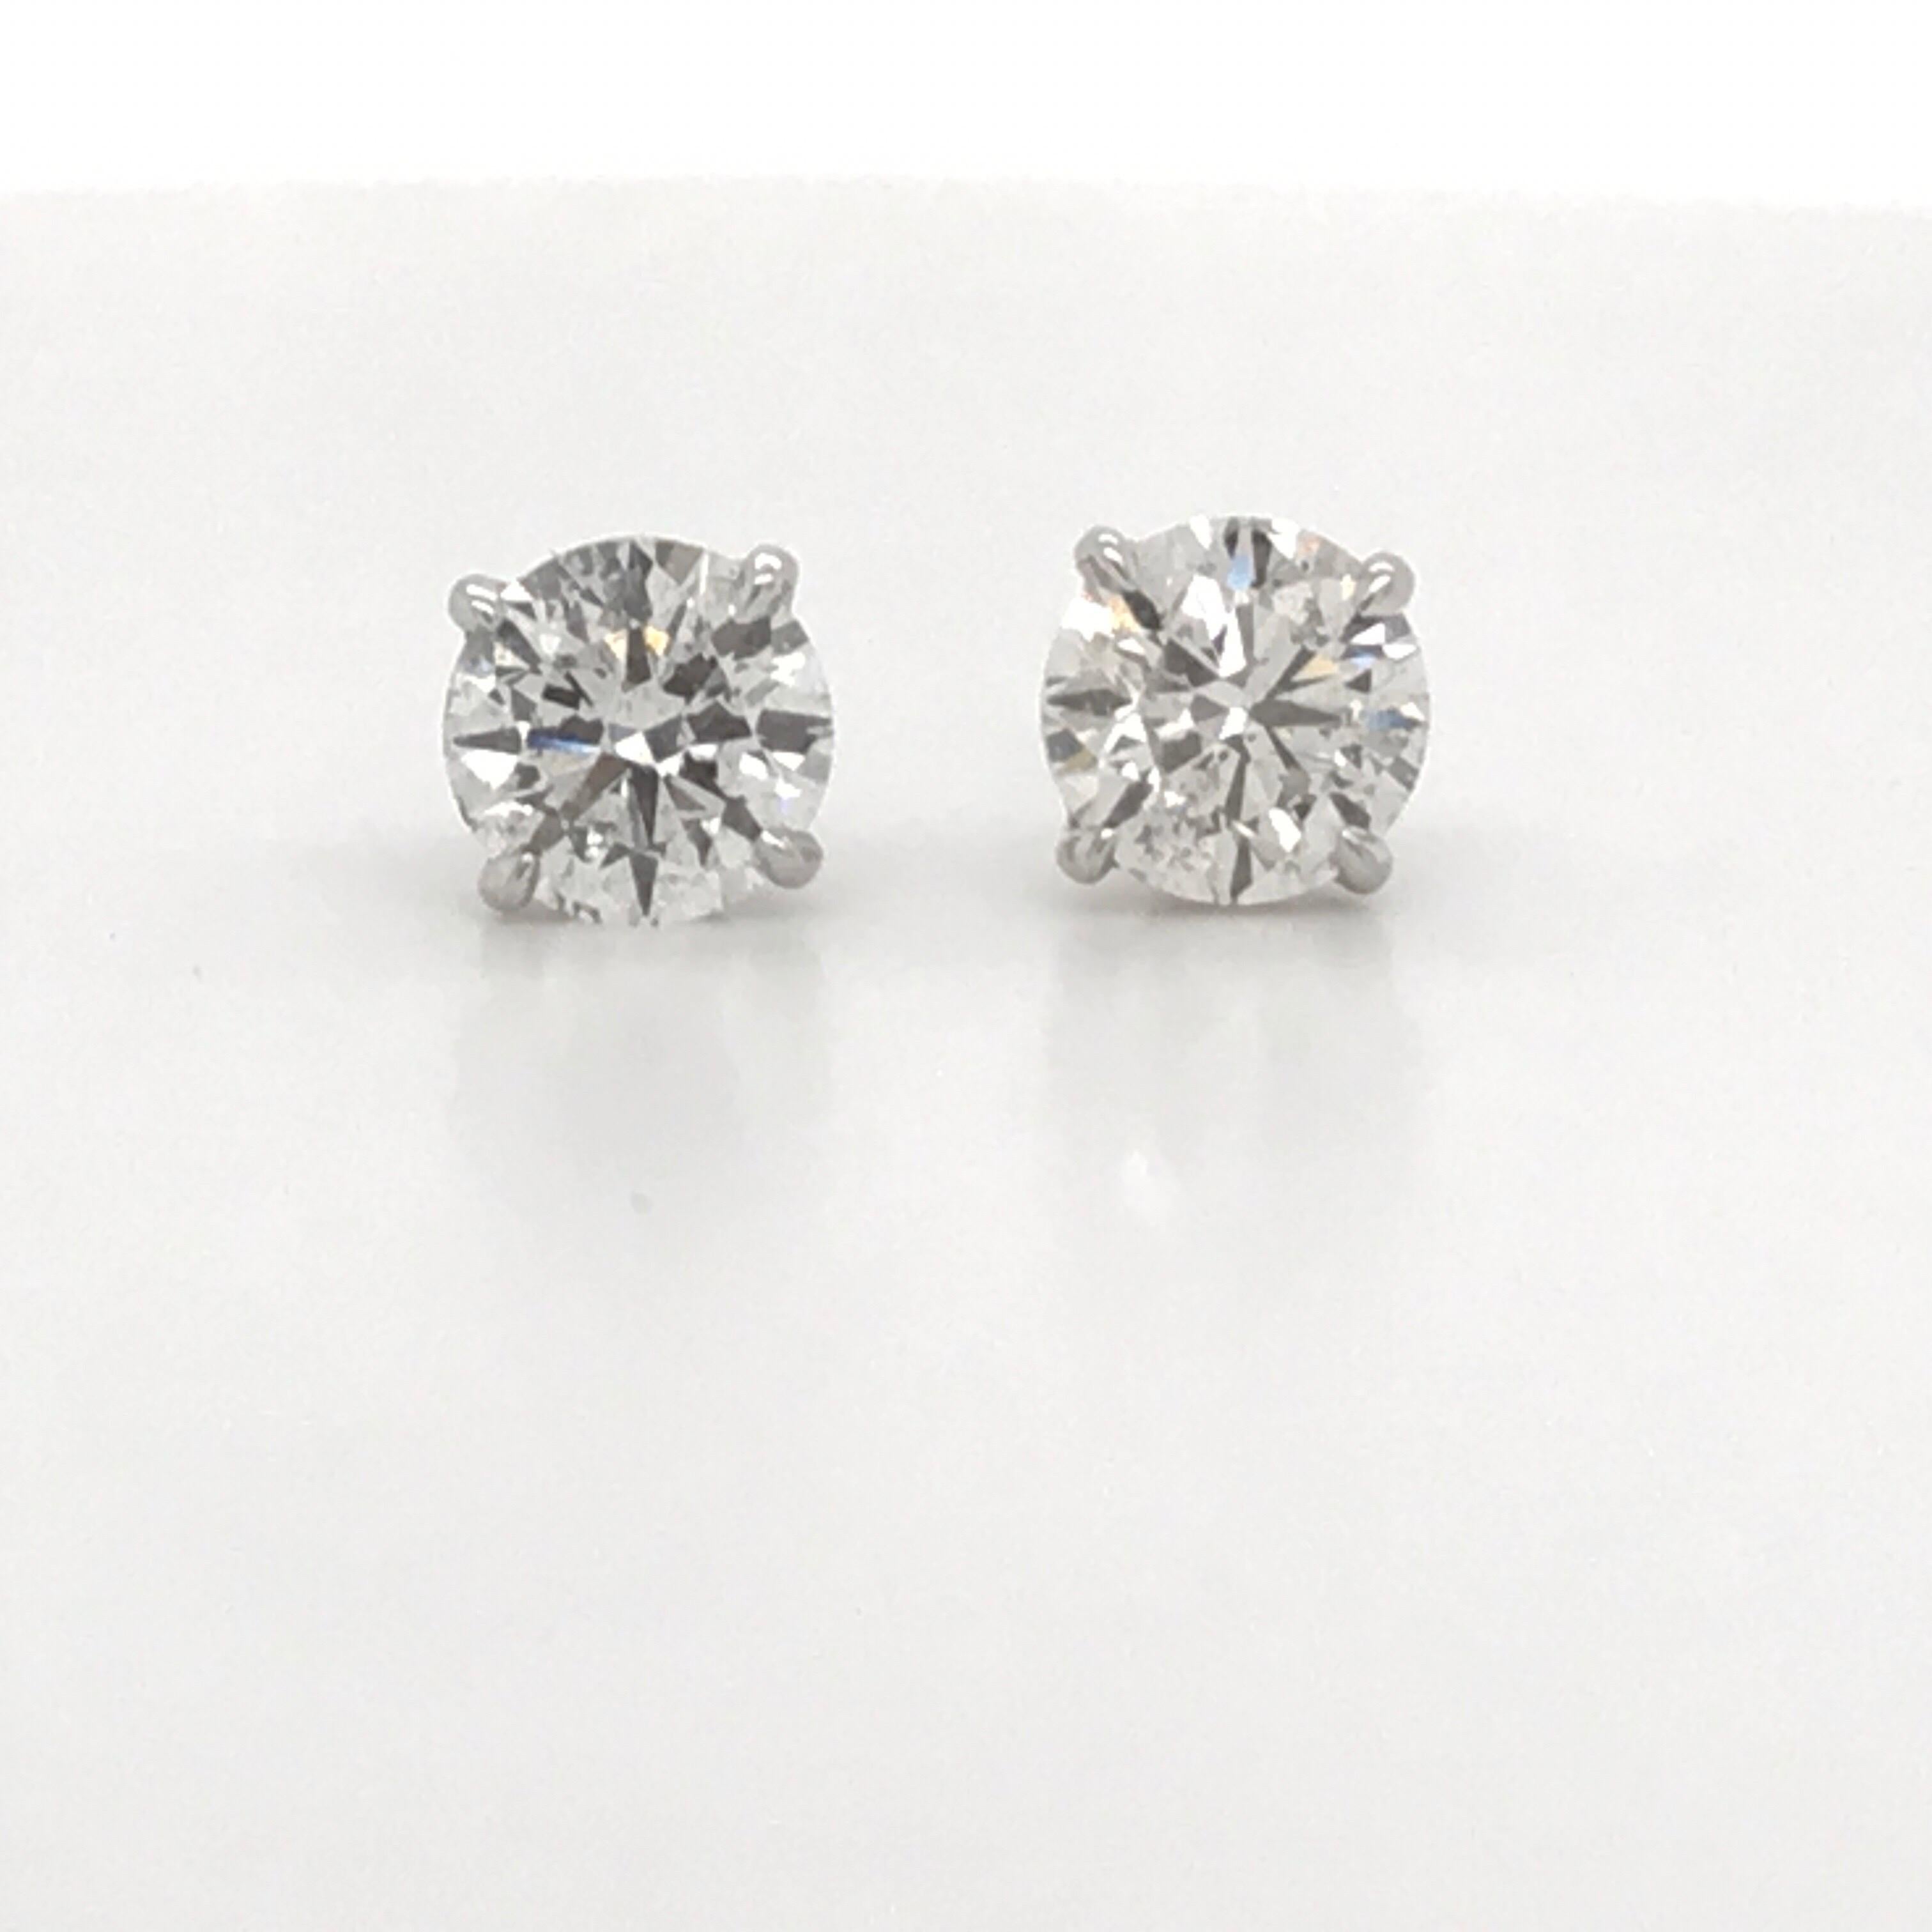 GIA Diamond stud earrings weighing 2.16 carats in an 18k white gold 4 prong champagne setting.
Color H-I
Clarity I1